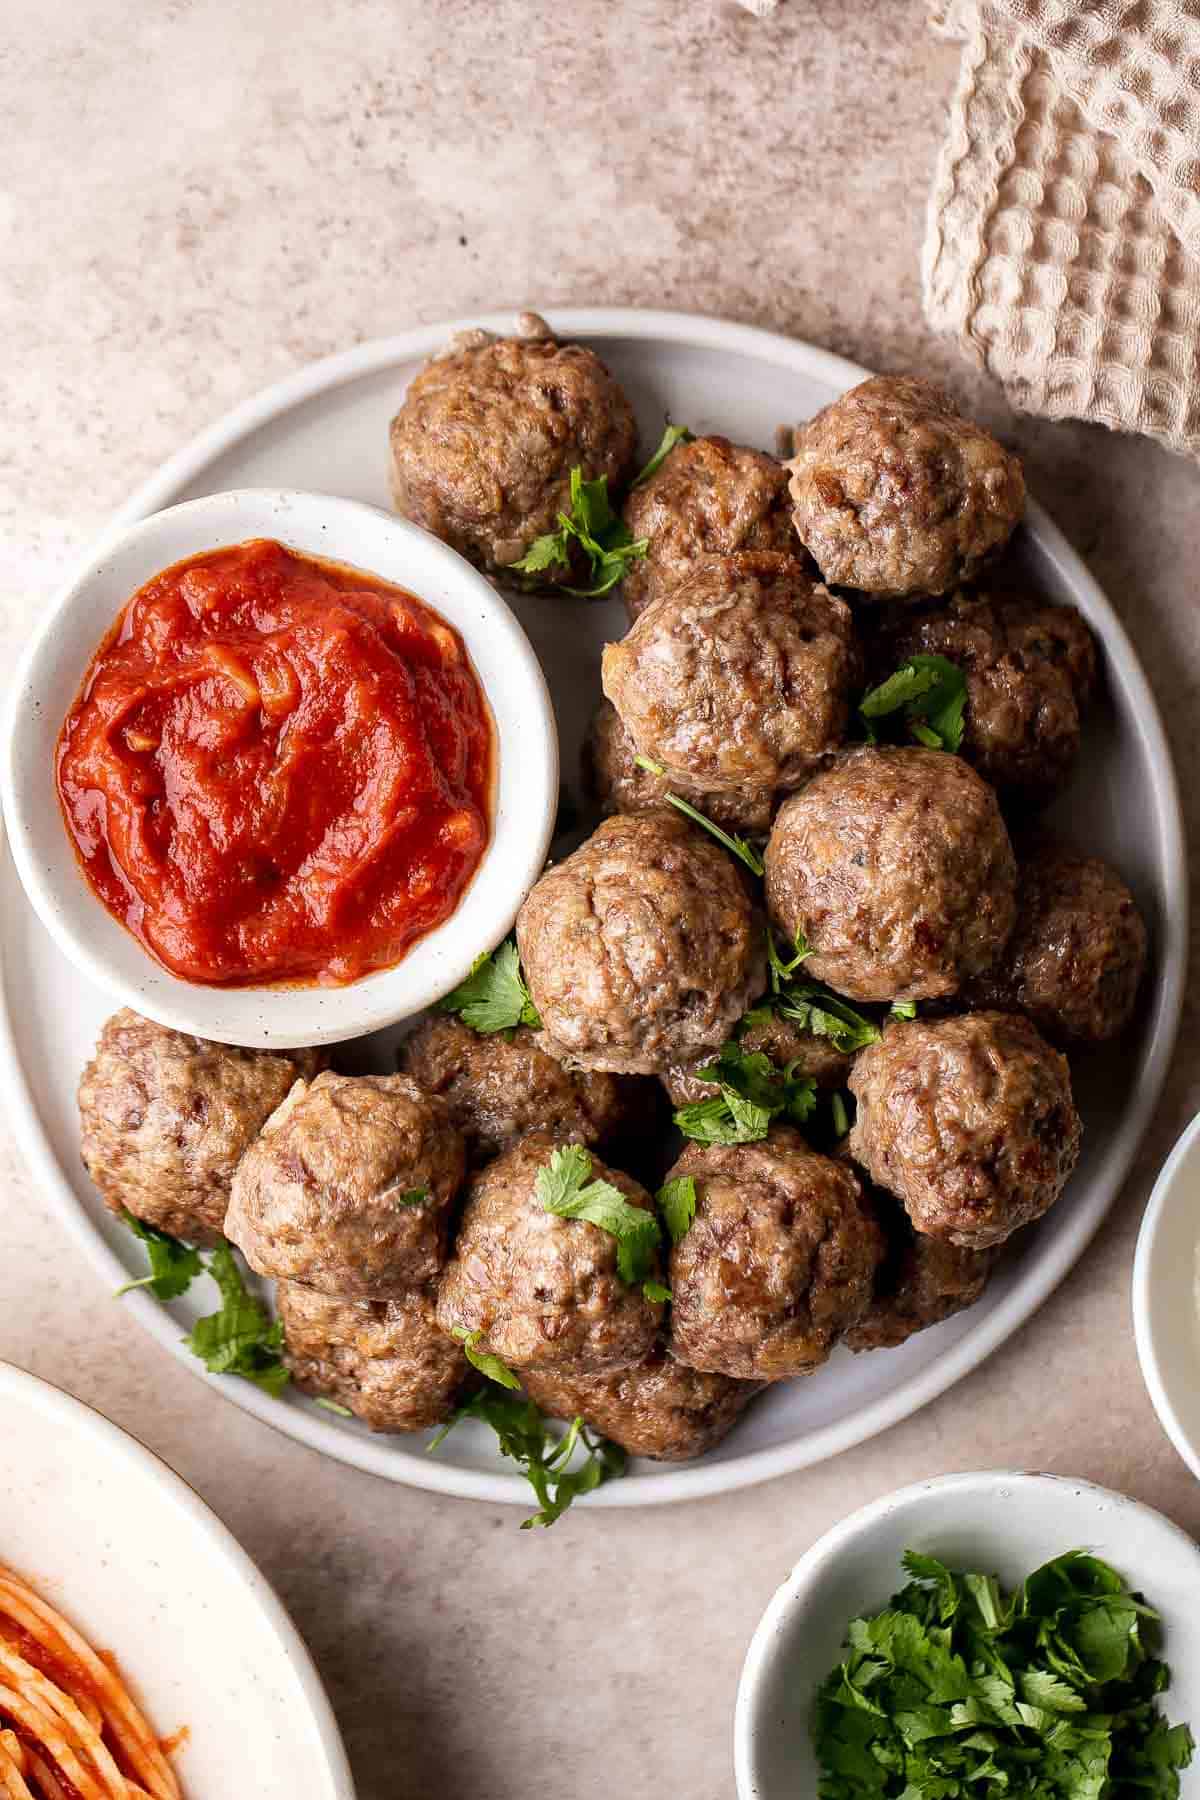 This Leftover Stuffing Meatballs recipe is an easy way to turn leftover stuffing from your Thanksgiving dinner into delicious, tender meatballs! | aheadofthyme.com